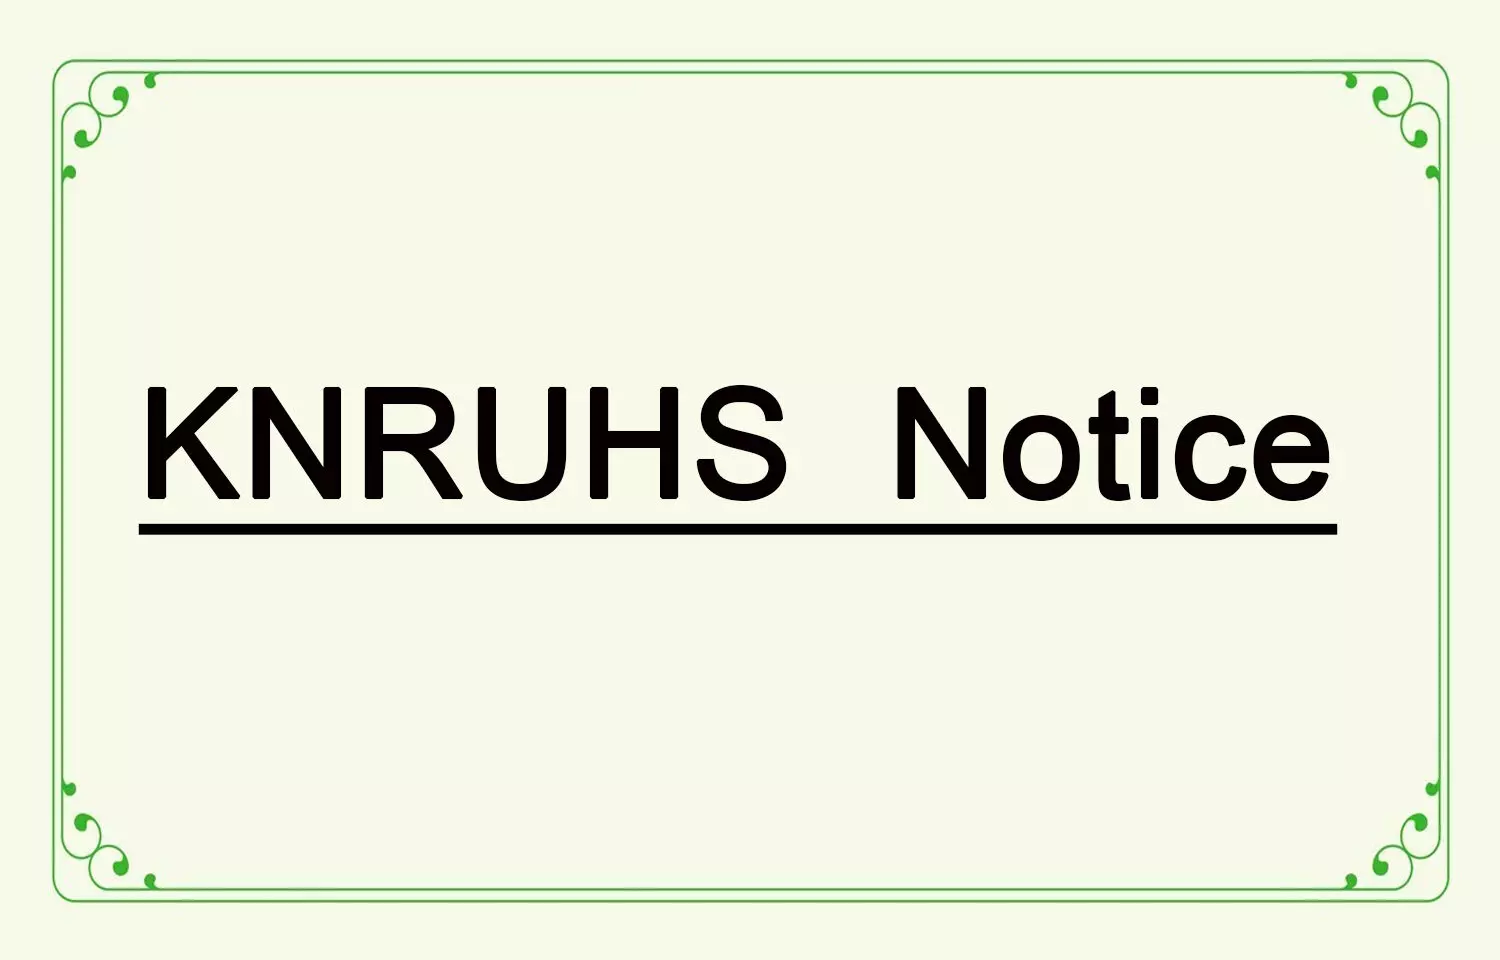 BAMS, BHMS, BNYS, BUMS admission in Telangana: KNRUHS notifies about verification of original certificates